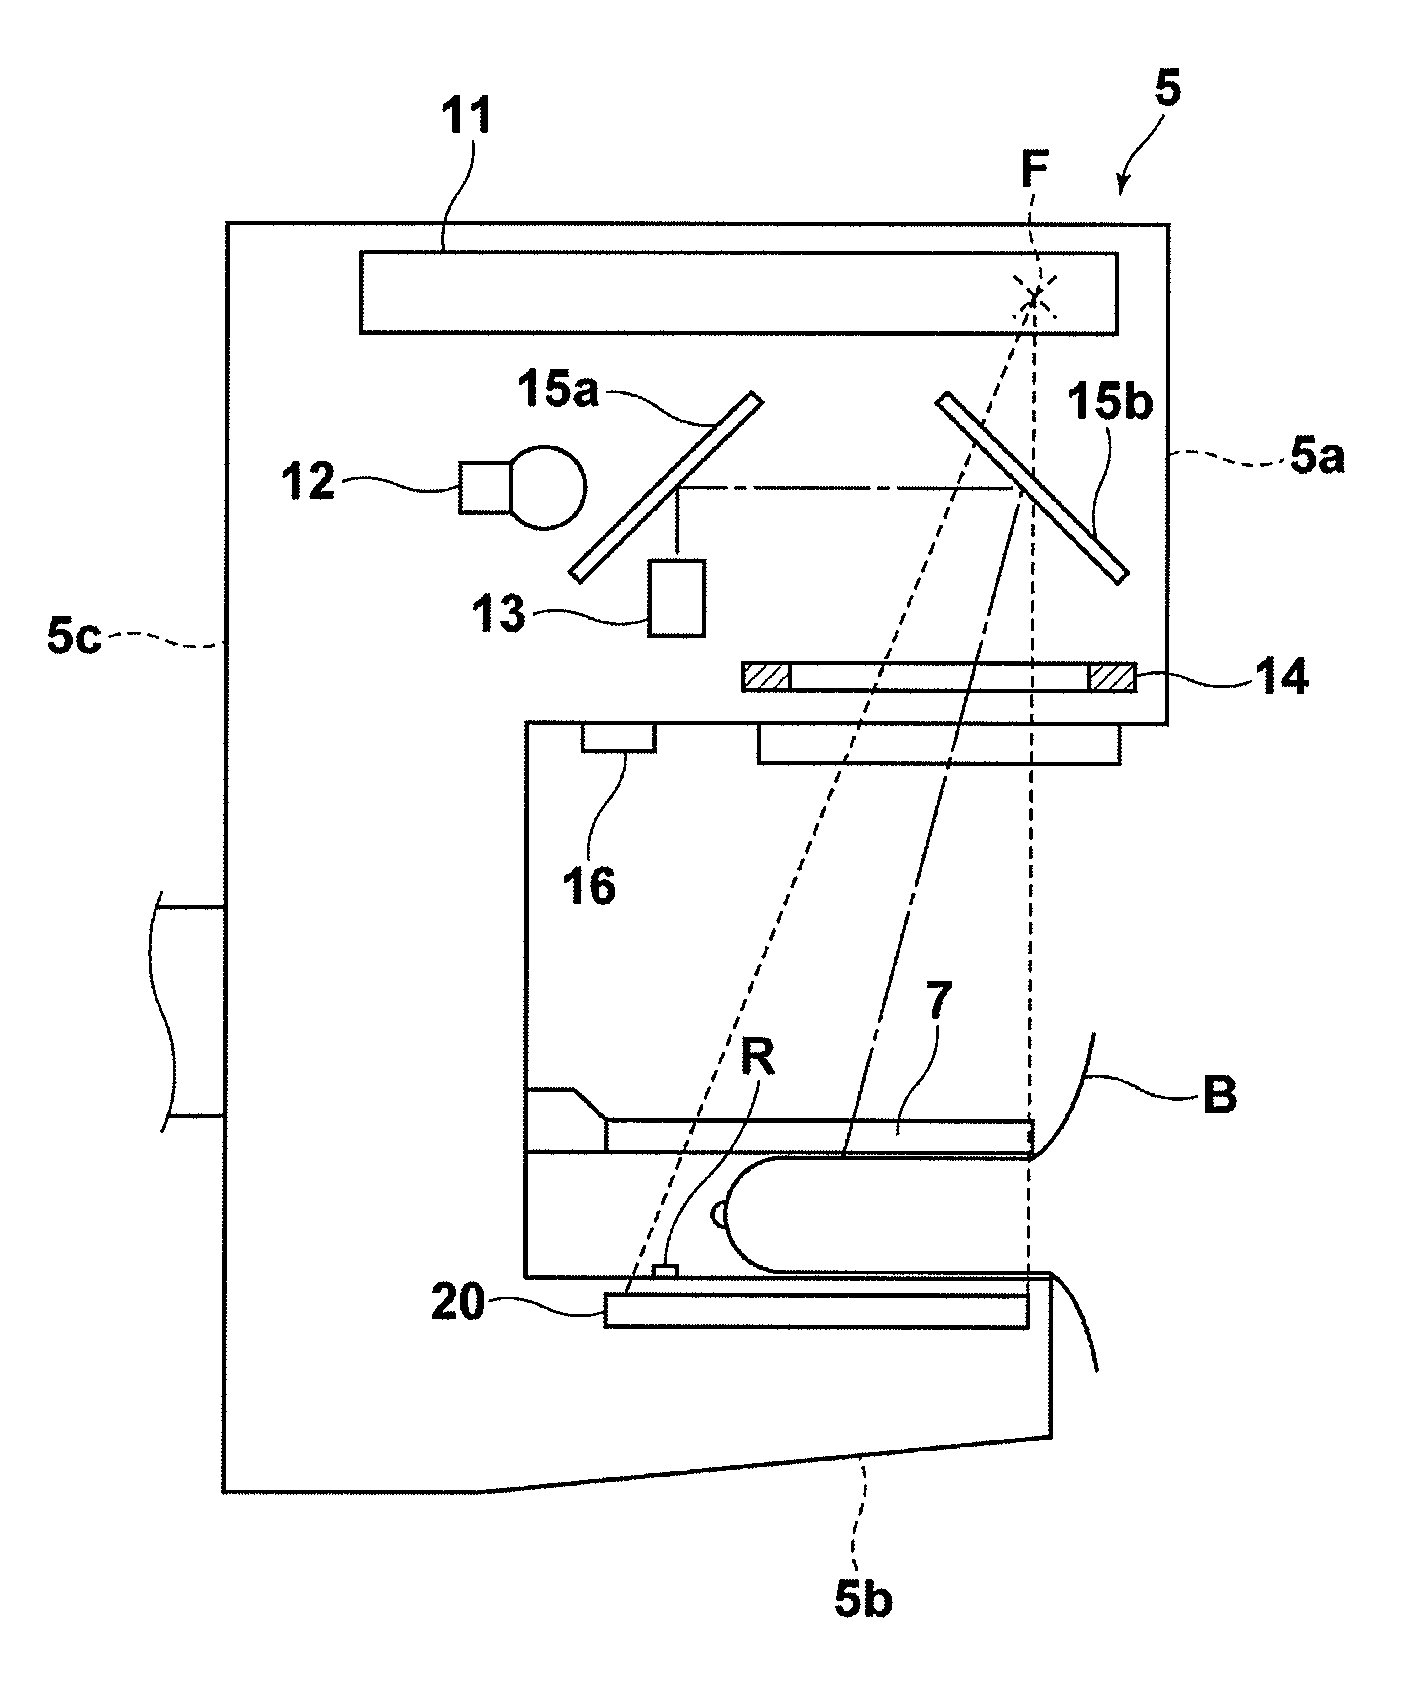 X-ray radiation image photographing apparatus